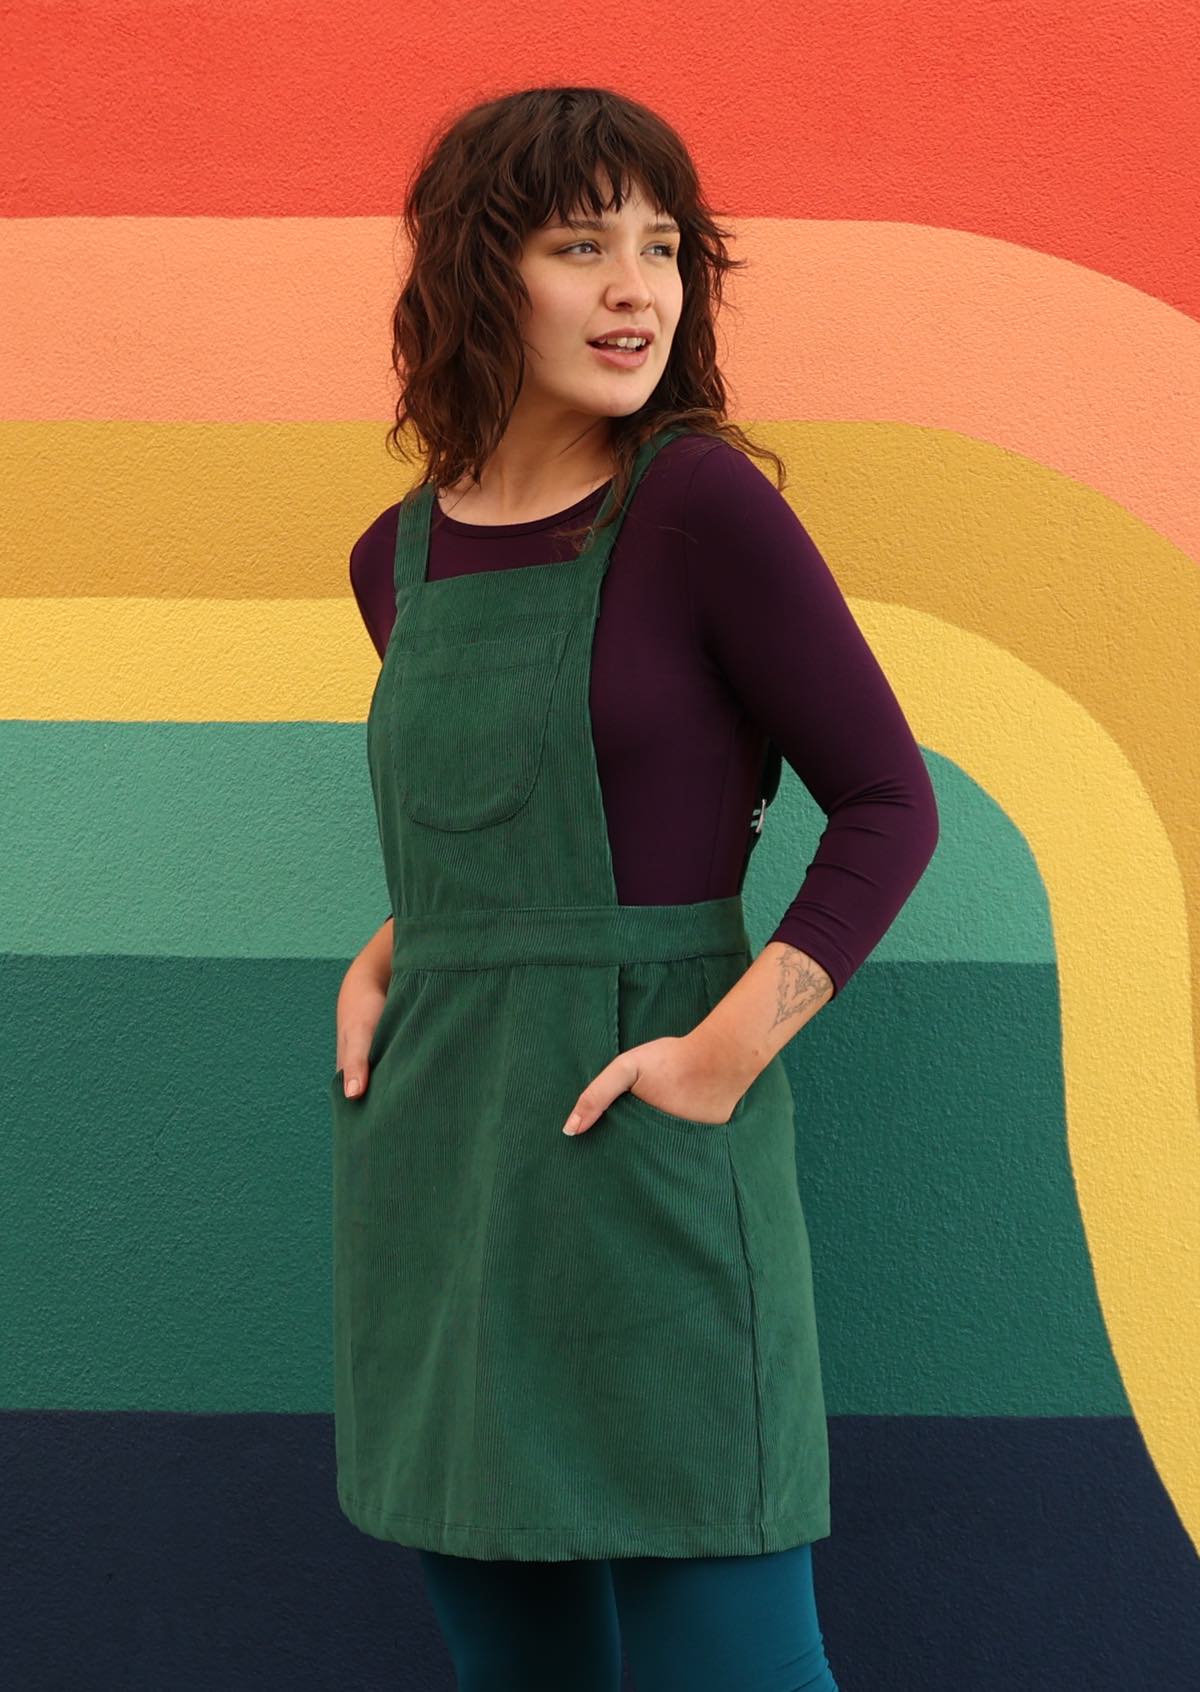 woman wearing green corduroy pinafore over purple top and teal leggings with hands in pockets